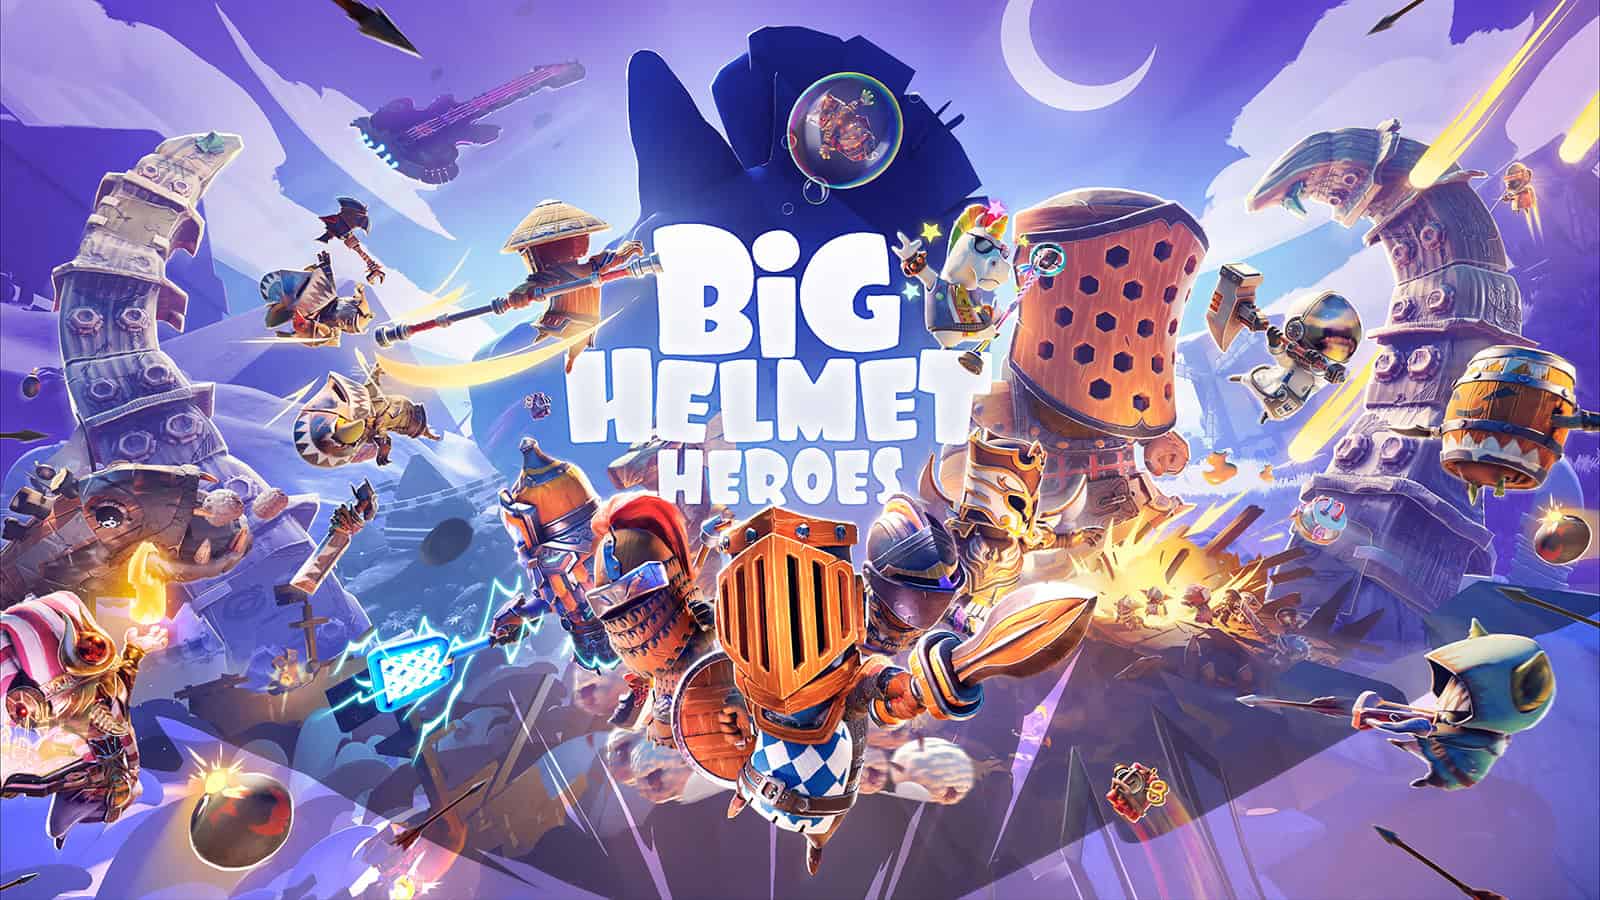 The official artwork for Big Helmet Heroes, showing some of the knights you'll be able to play as.